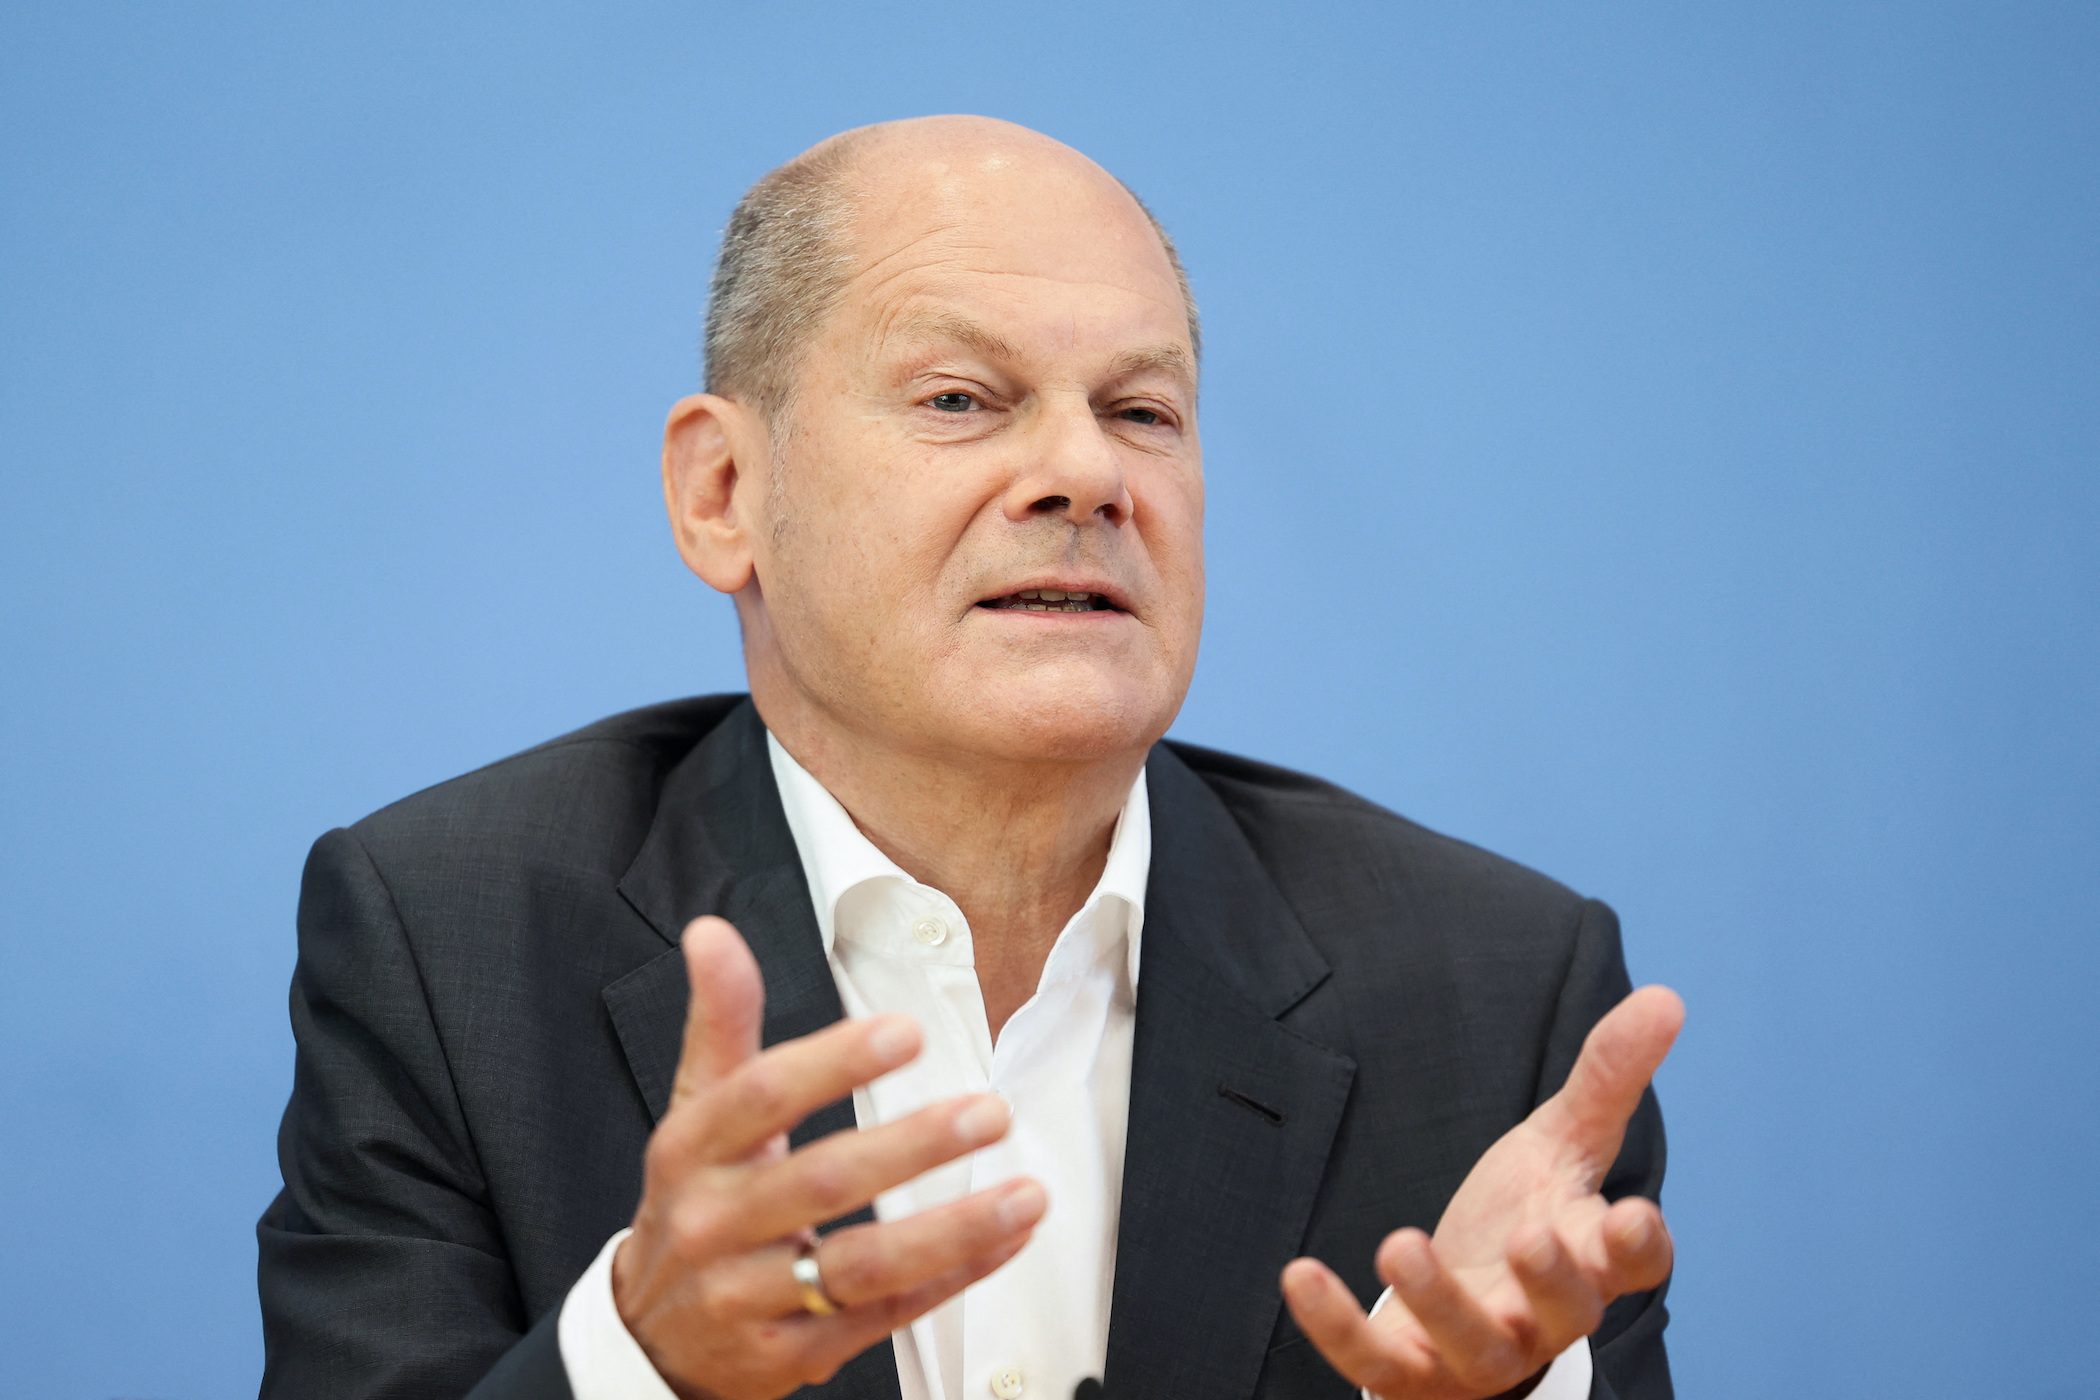 ‘Count on us’: Scholz promises new package to help Germans with energy bills